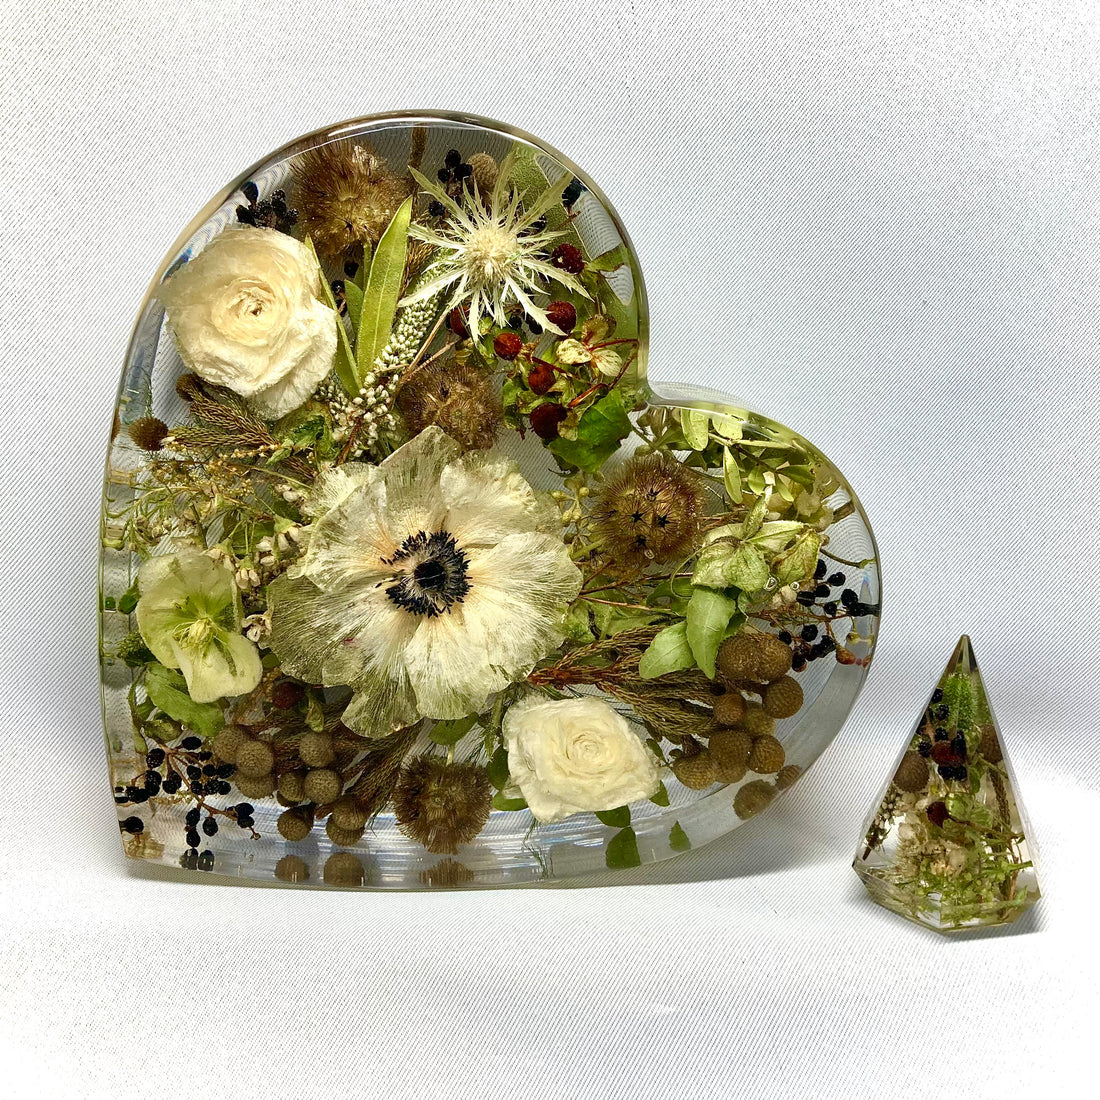 A stunning heart-shaped wedding flower preservation made with clear resin, preserving your special day's memories forever.